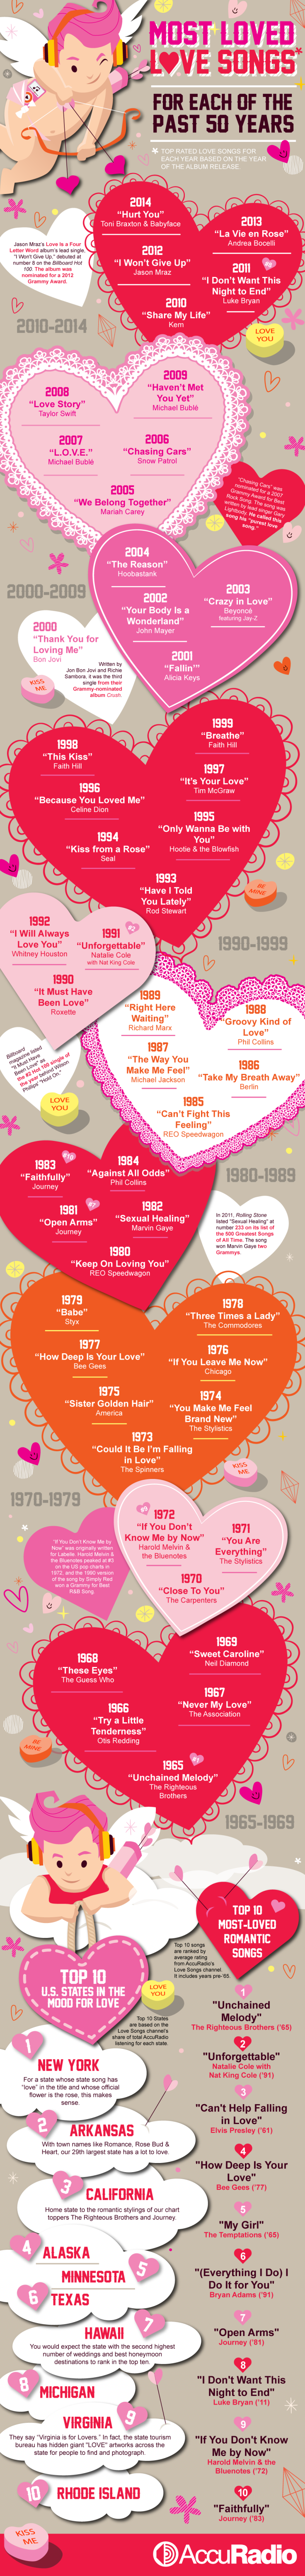 Most Loved Love Songs